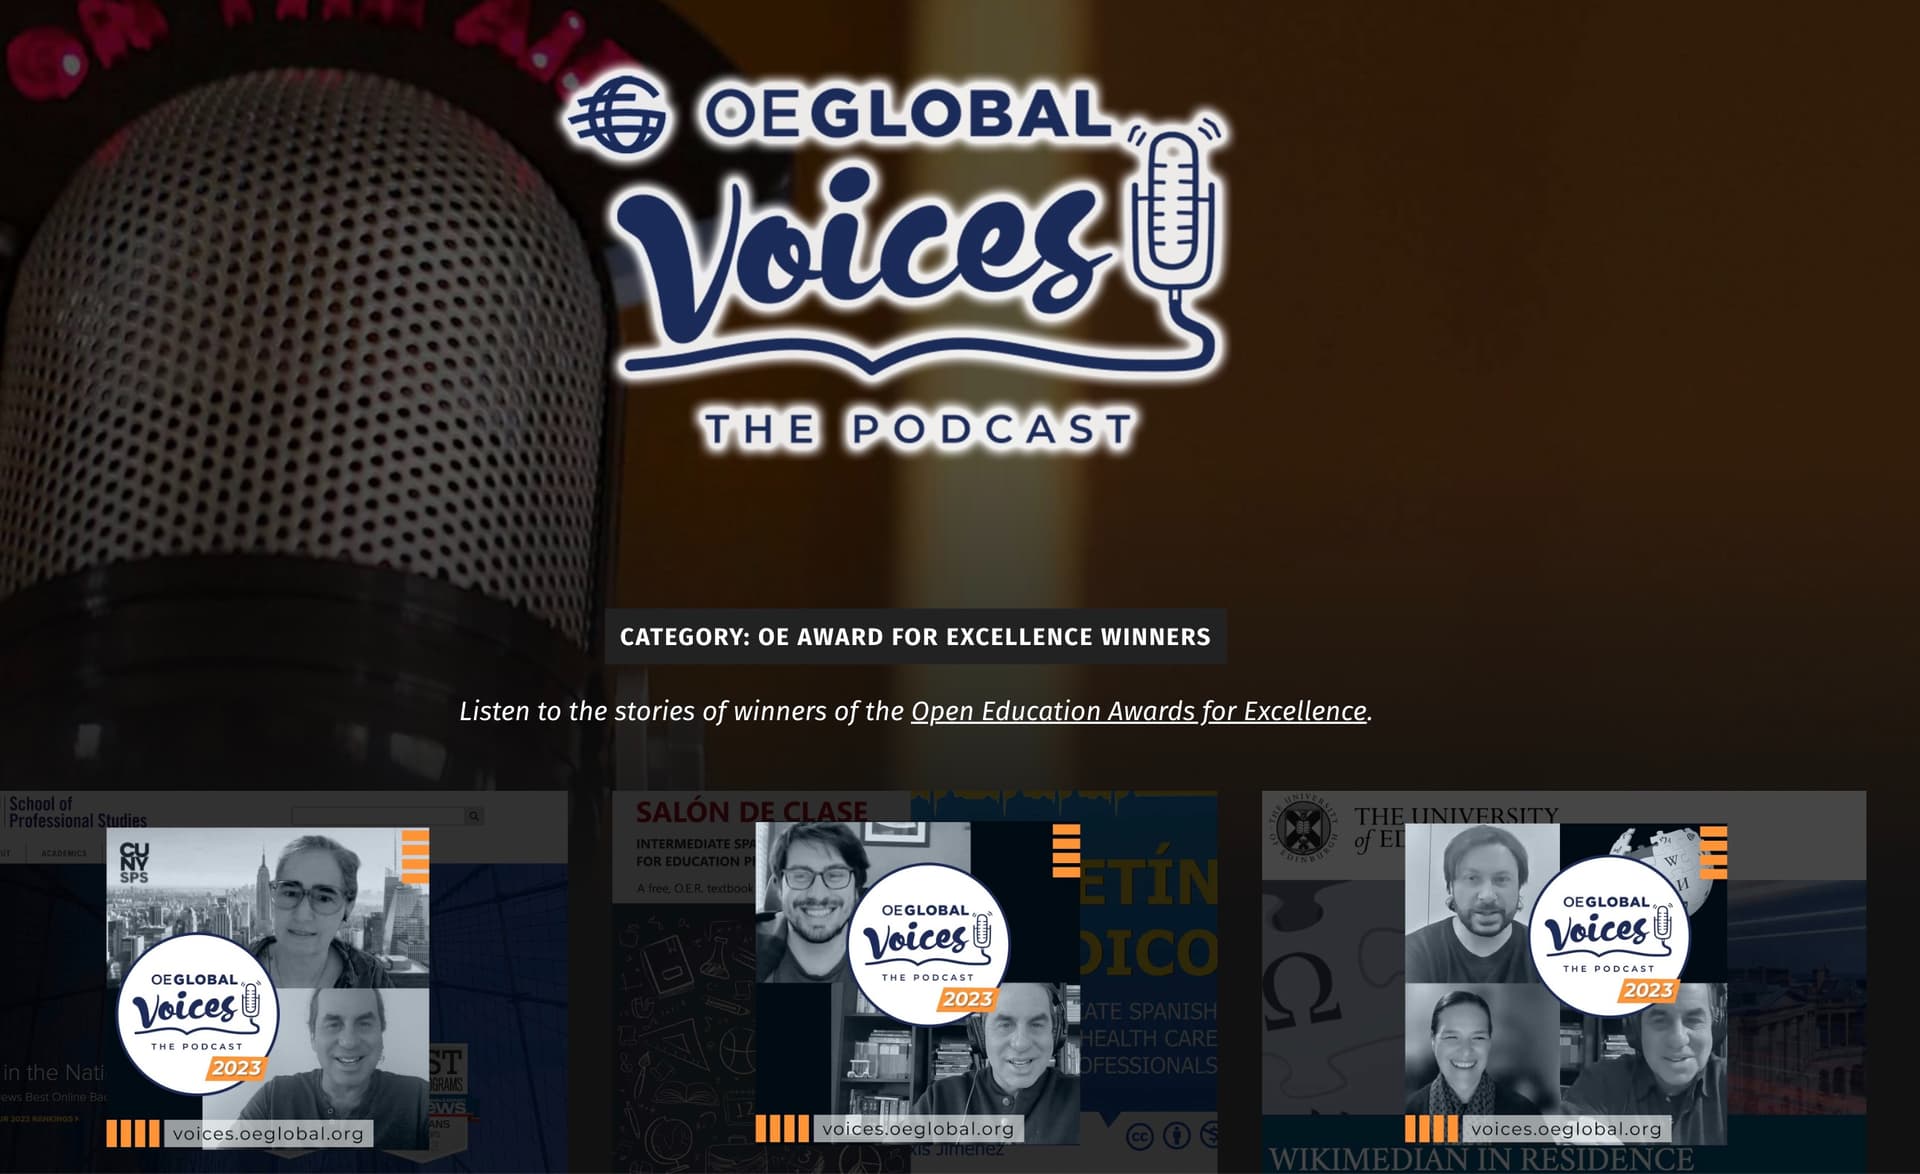 OEG Voices Podcast collection of episodes featuring OE Award for Excellence